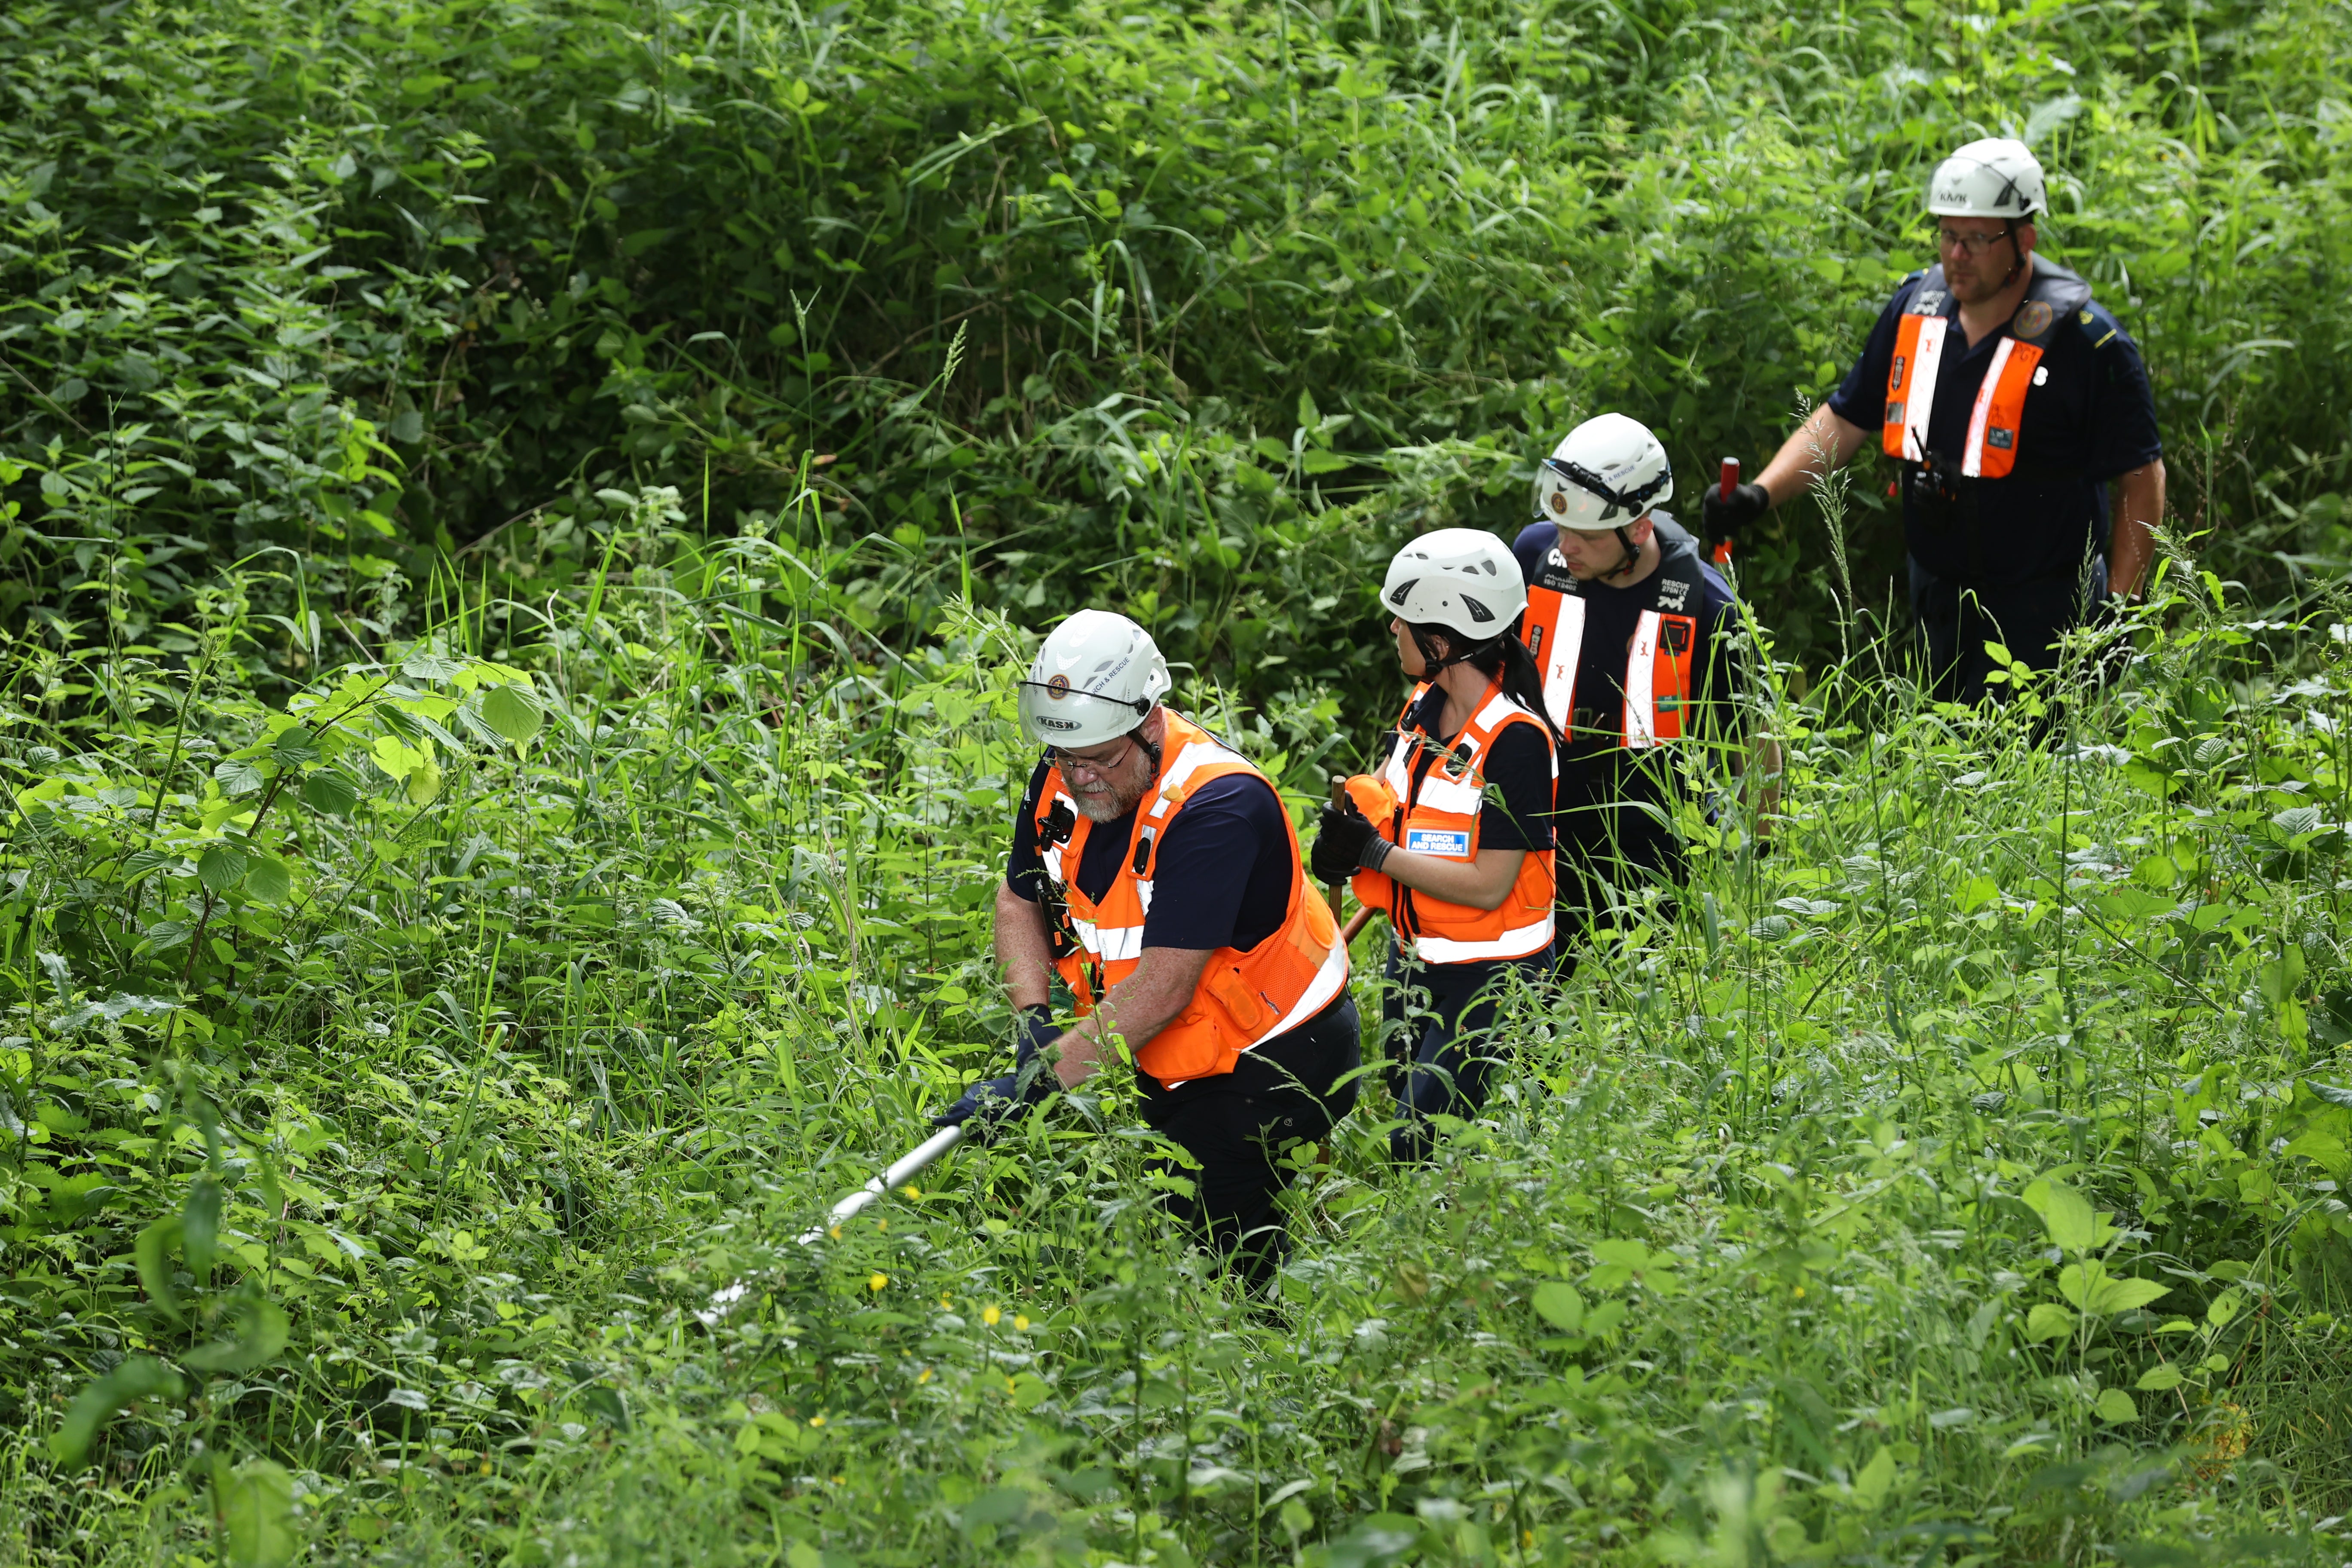 Extensive searches took place around Ballymena before suspected human remains were found on Sunday